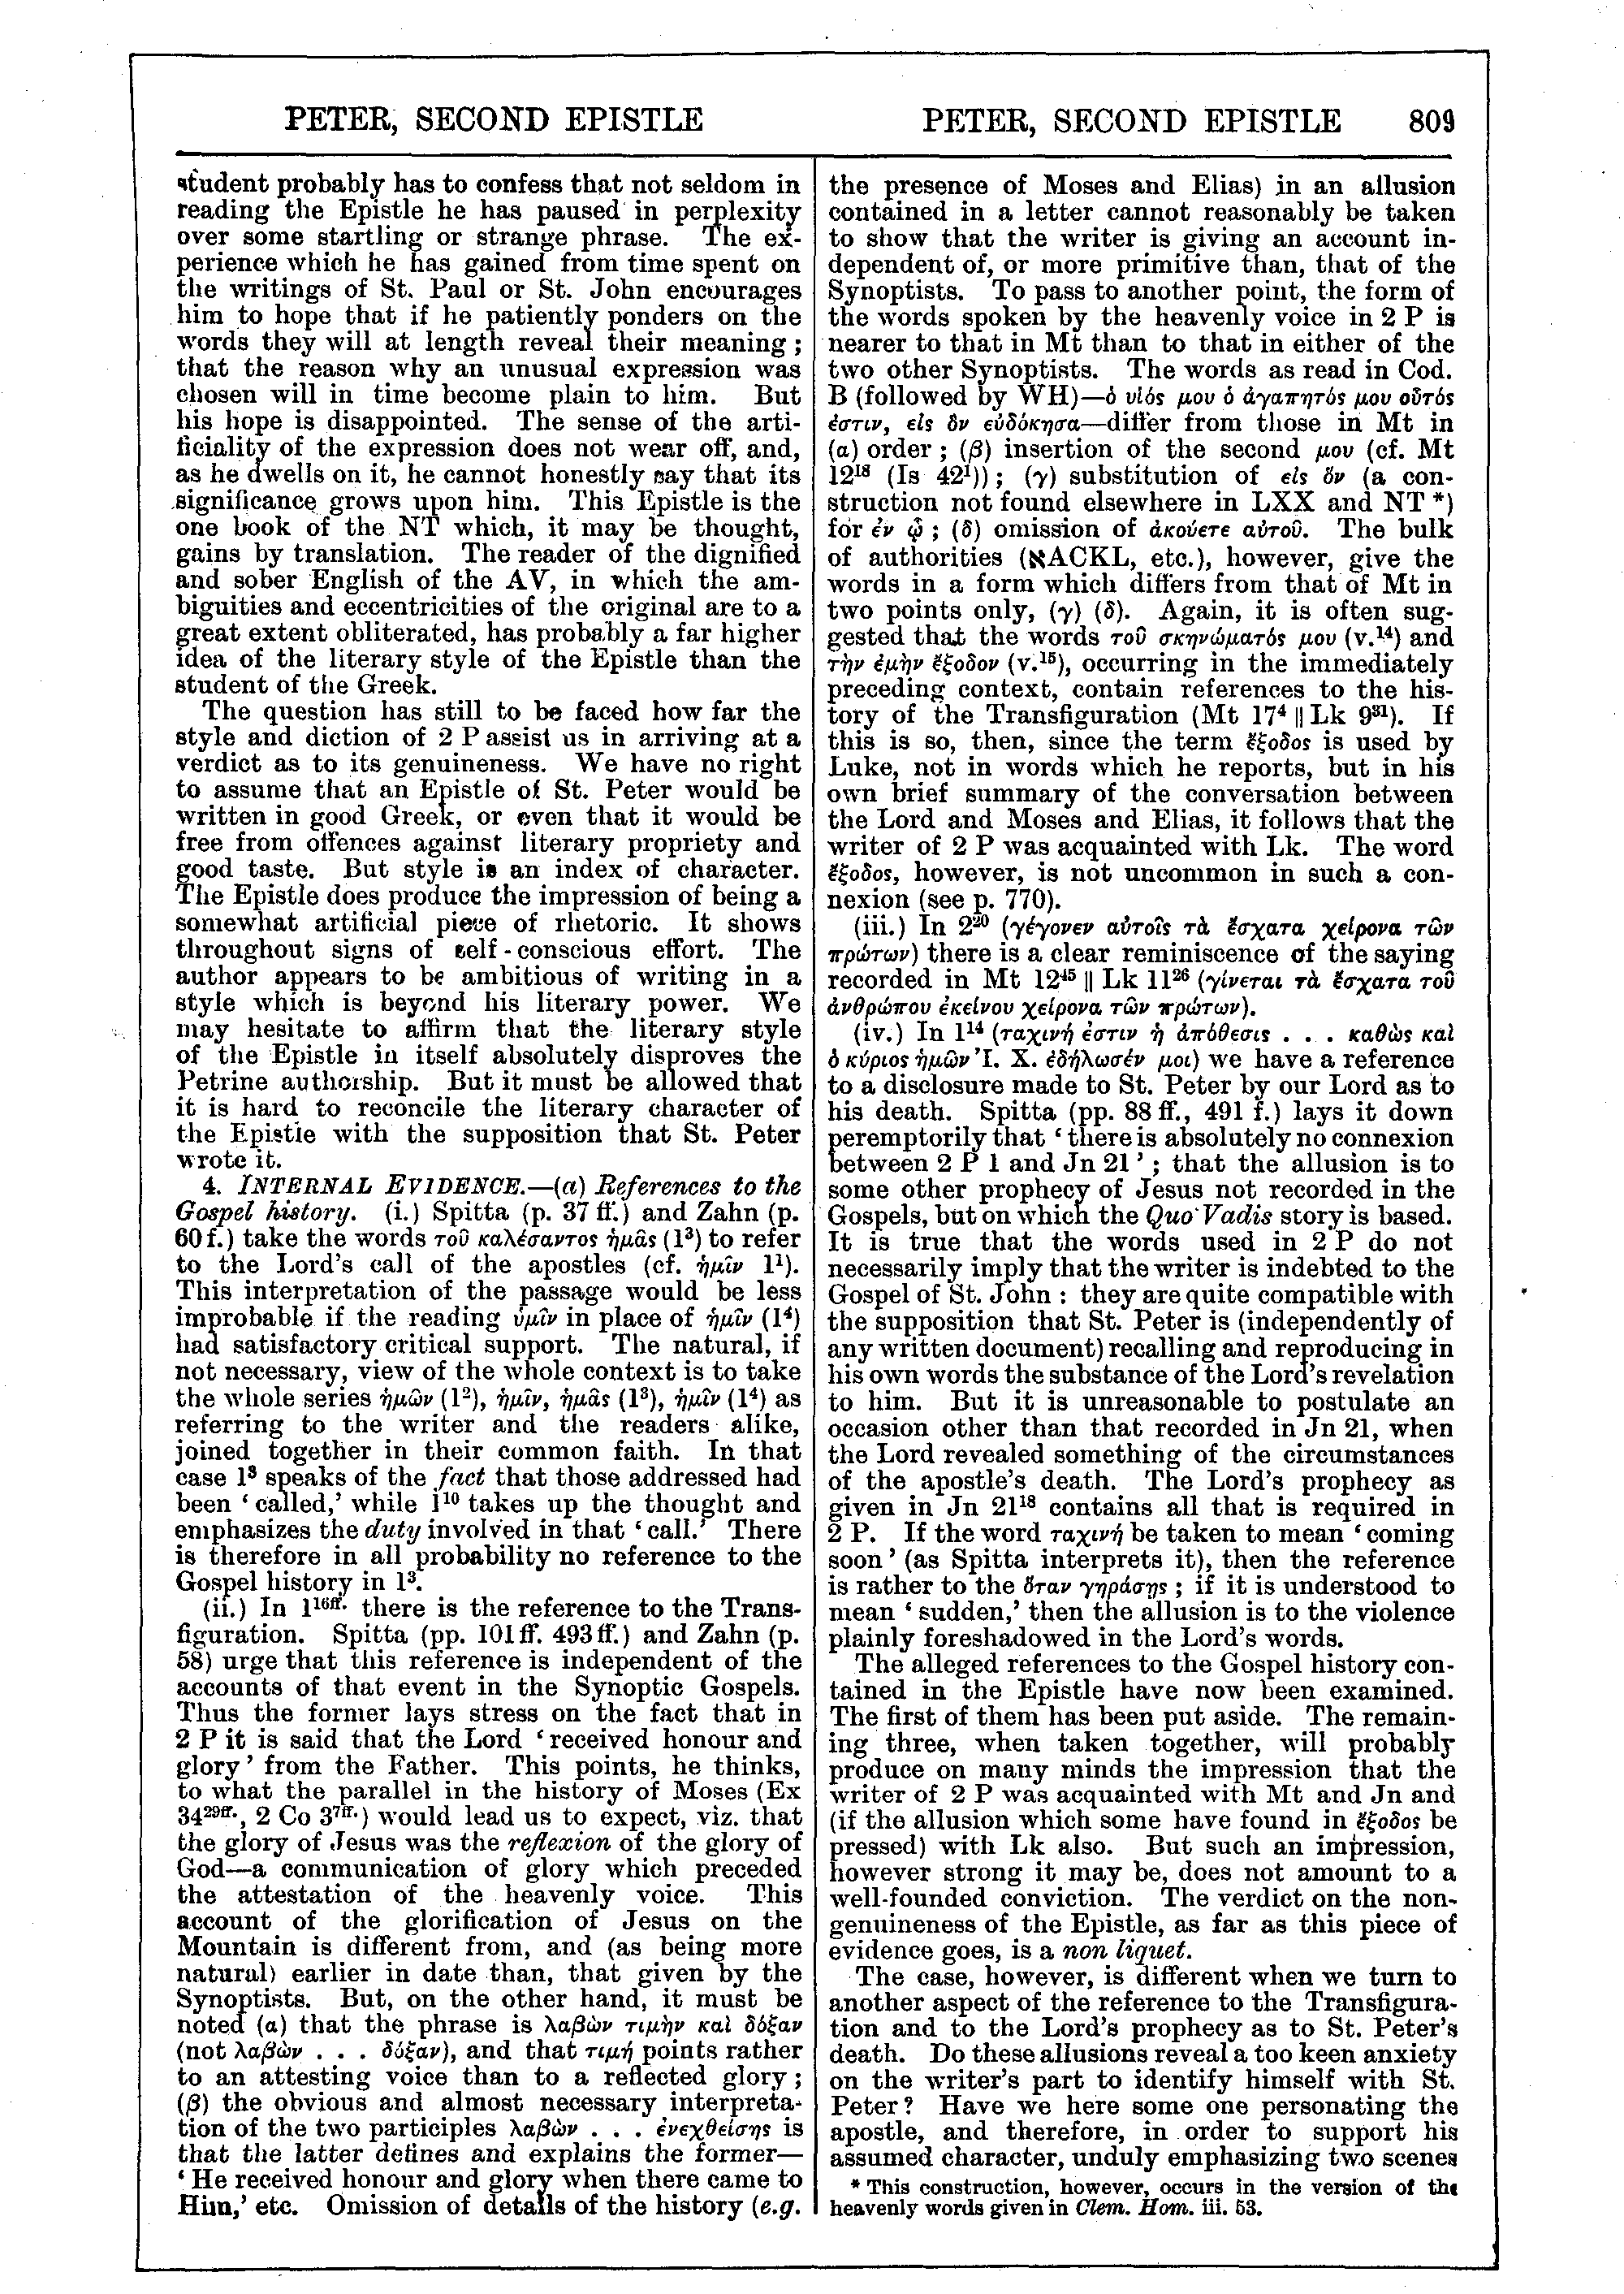 Image of page 809